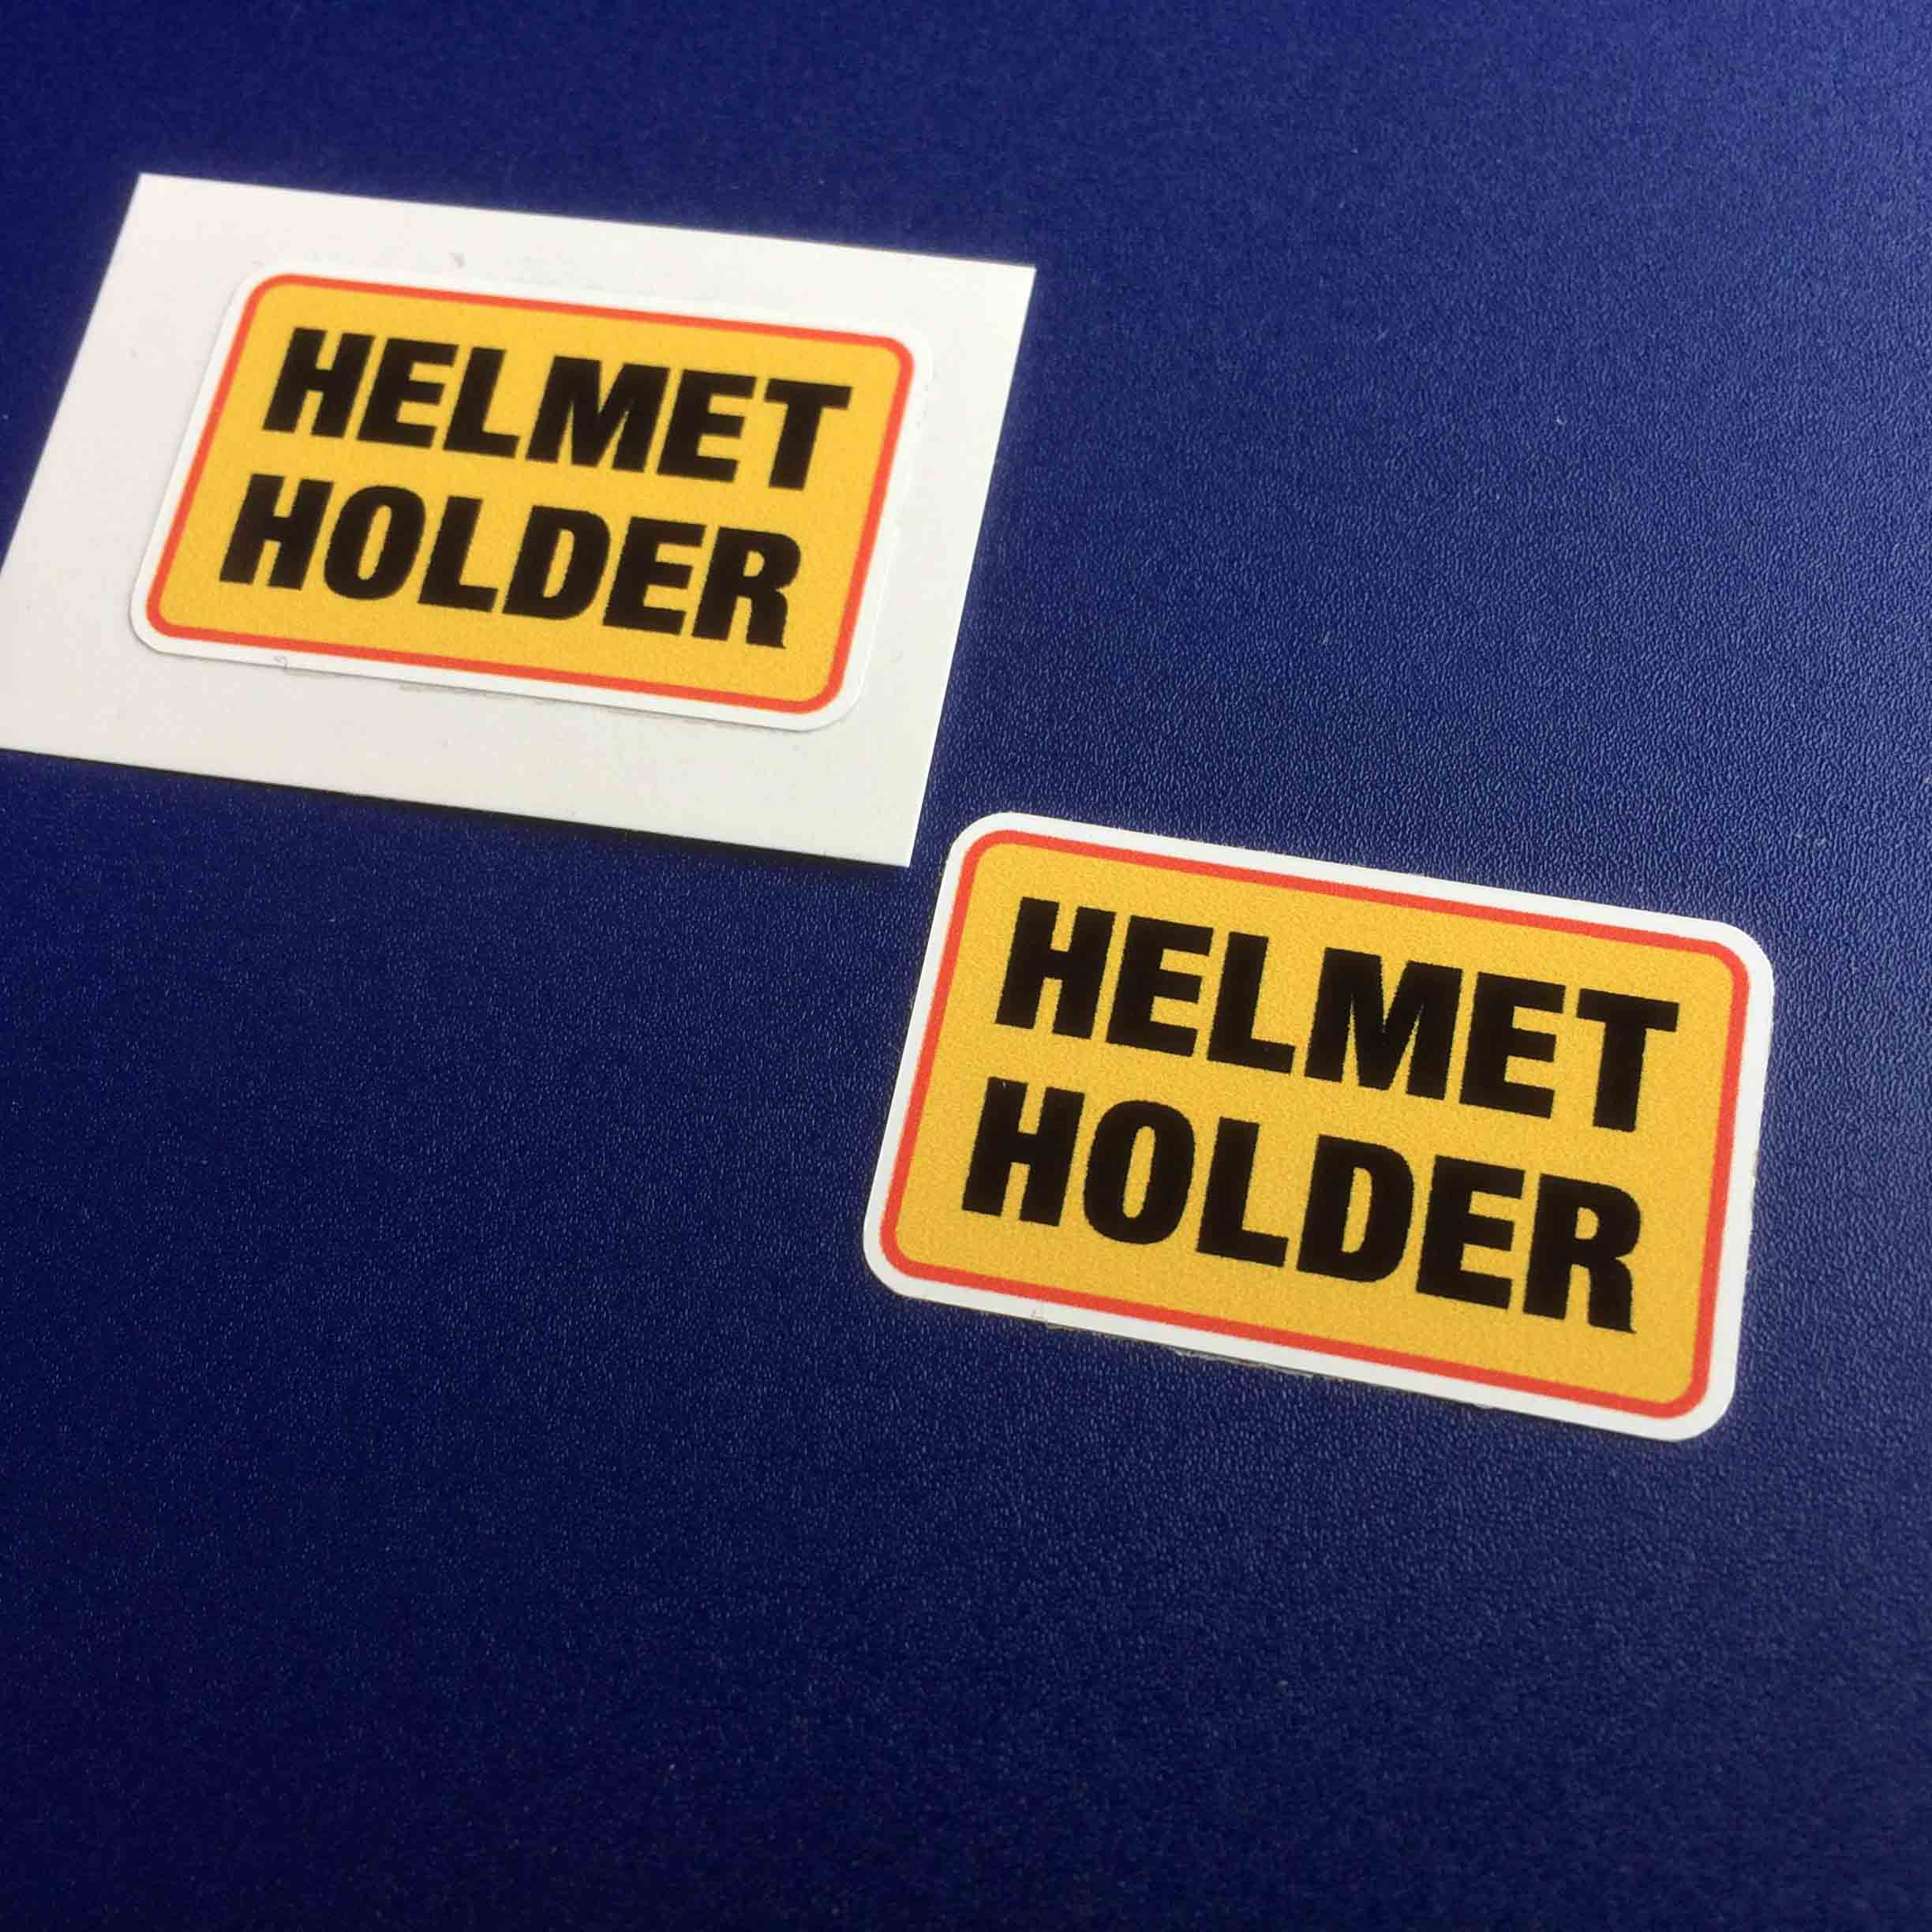 Helmet Holder in bold black uppercase lettering on a yellow background with an orange border.